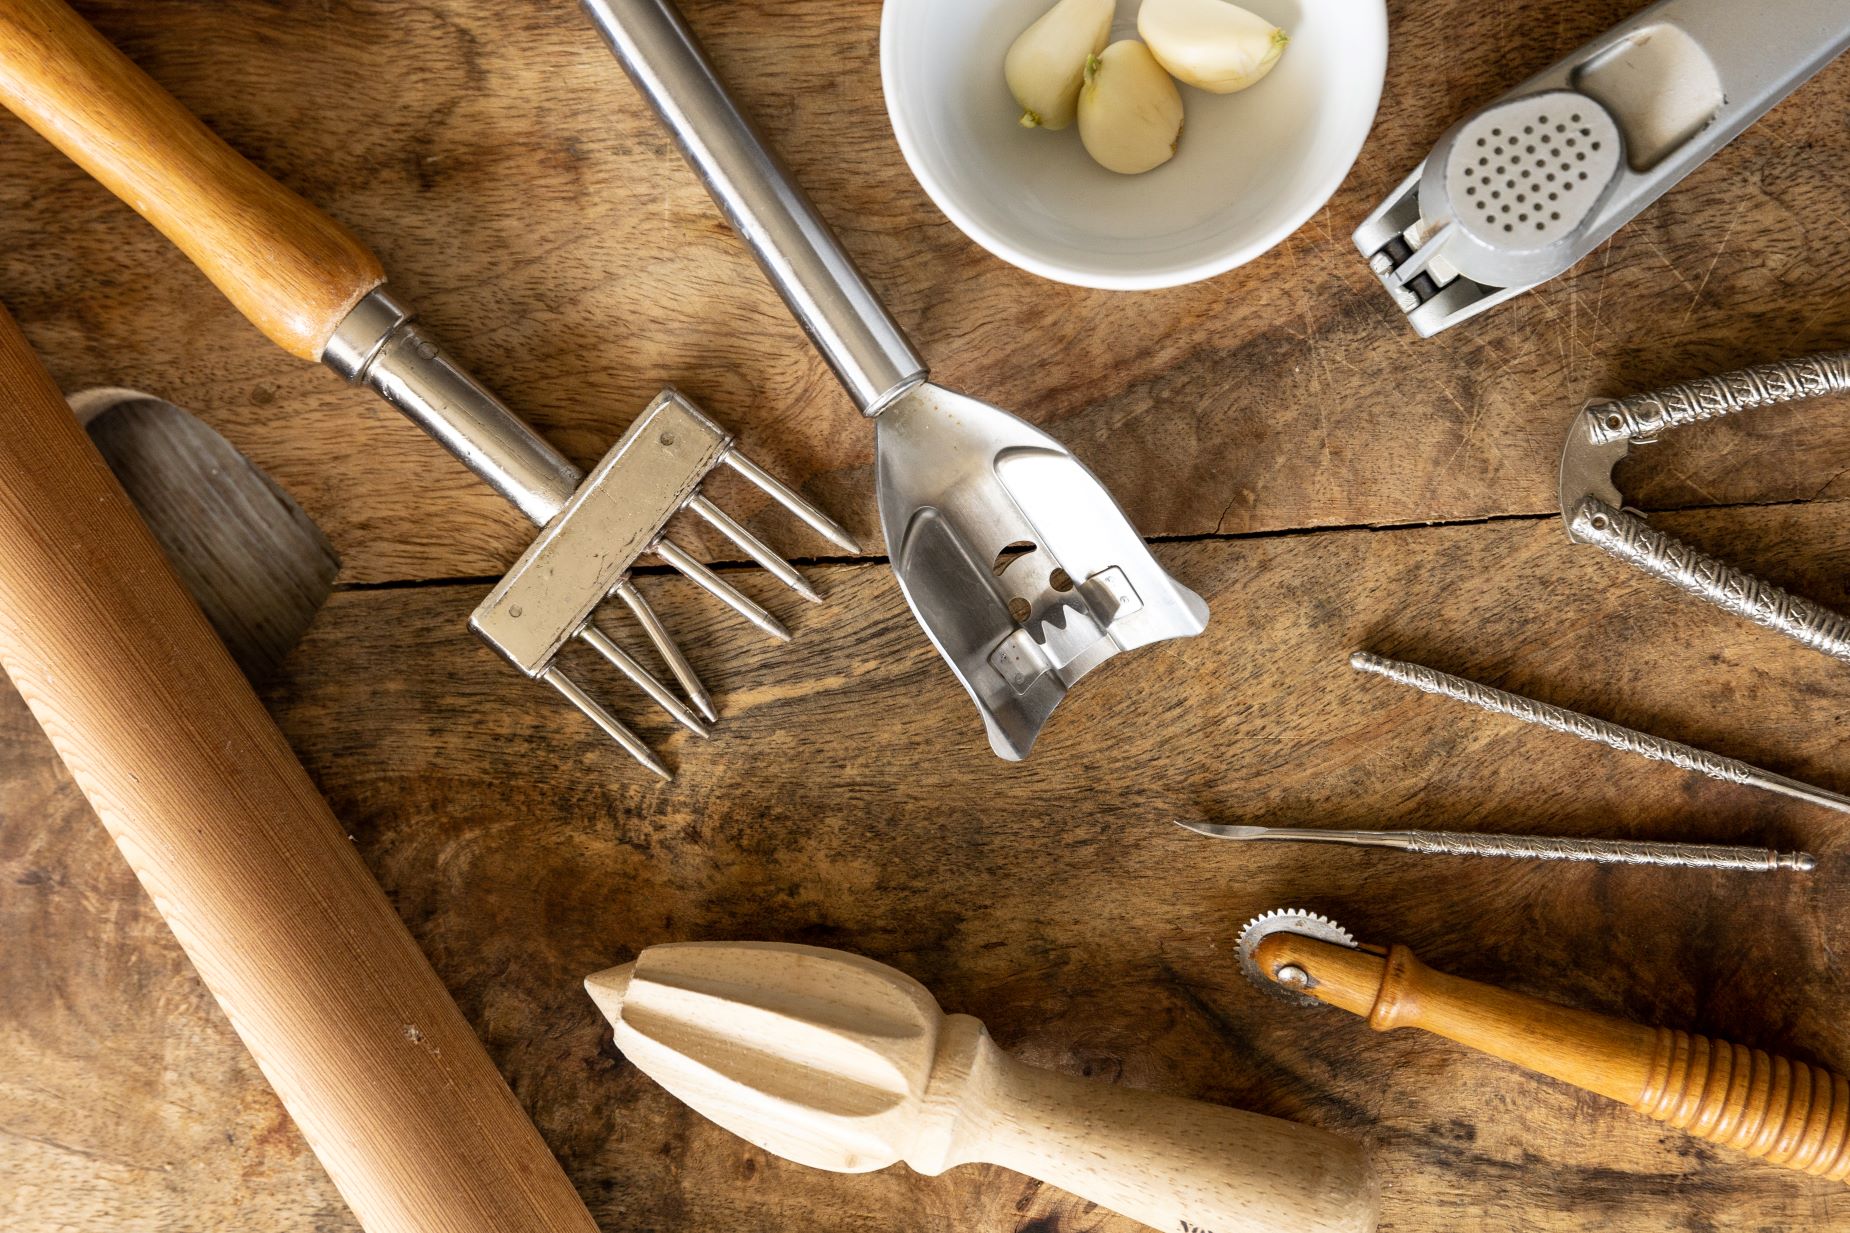 7 Pretty Cool Kitchen Gadgets That Are Actually Useful